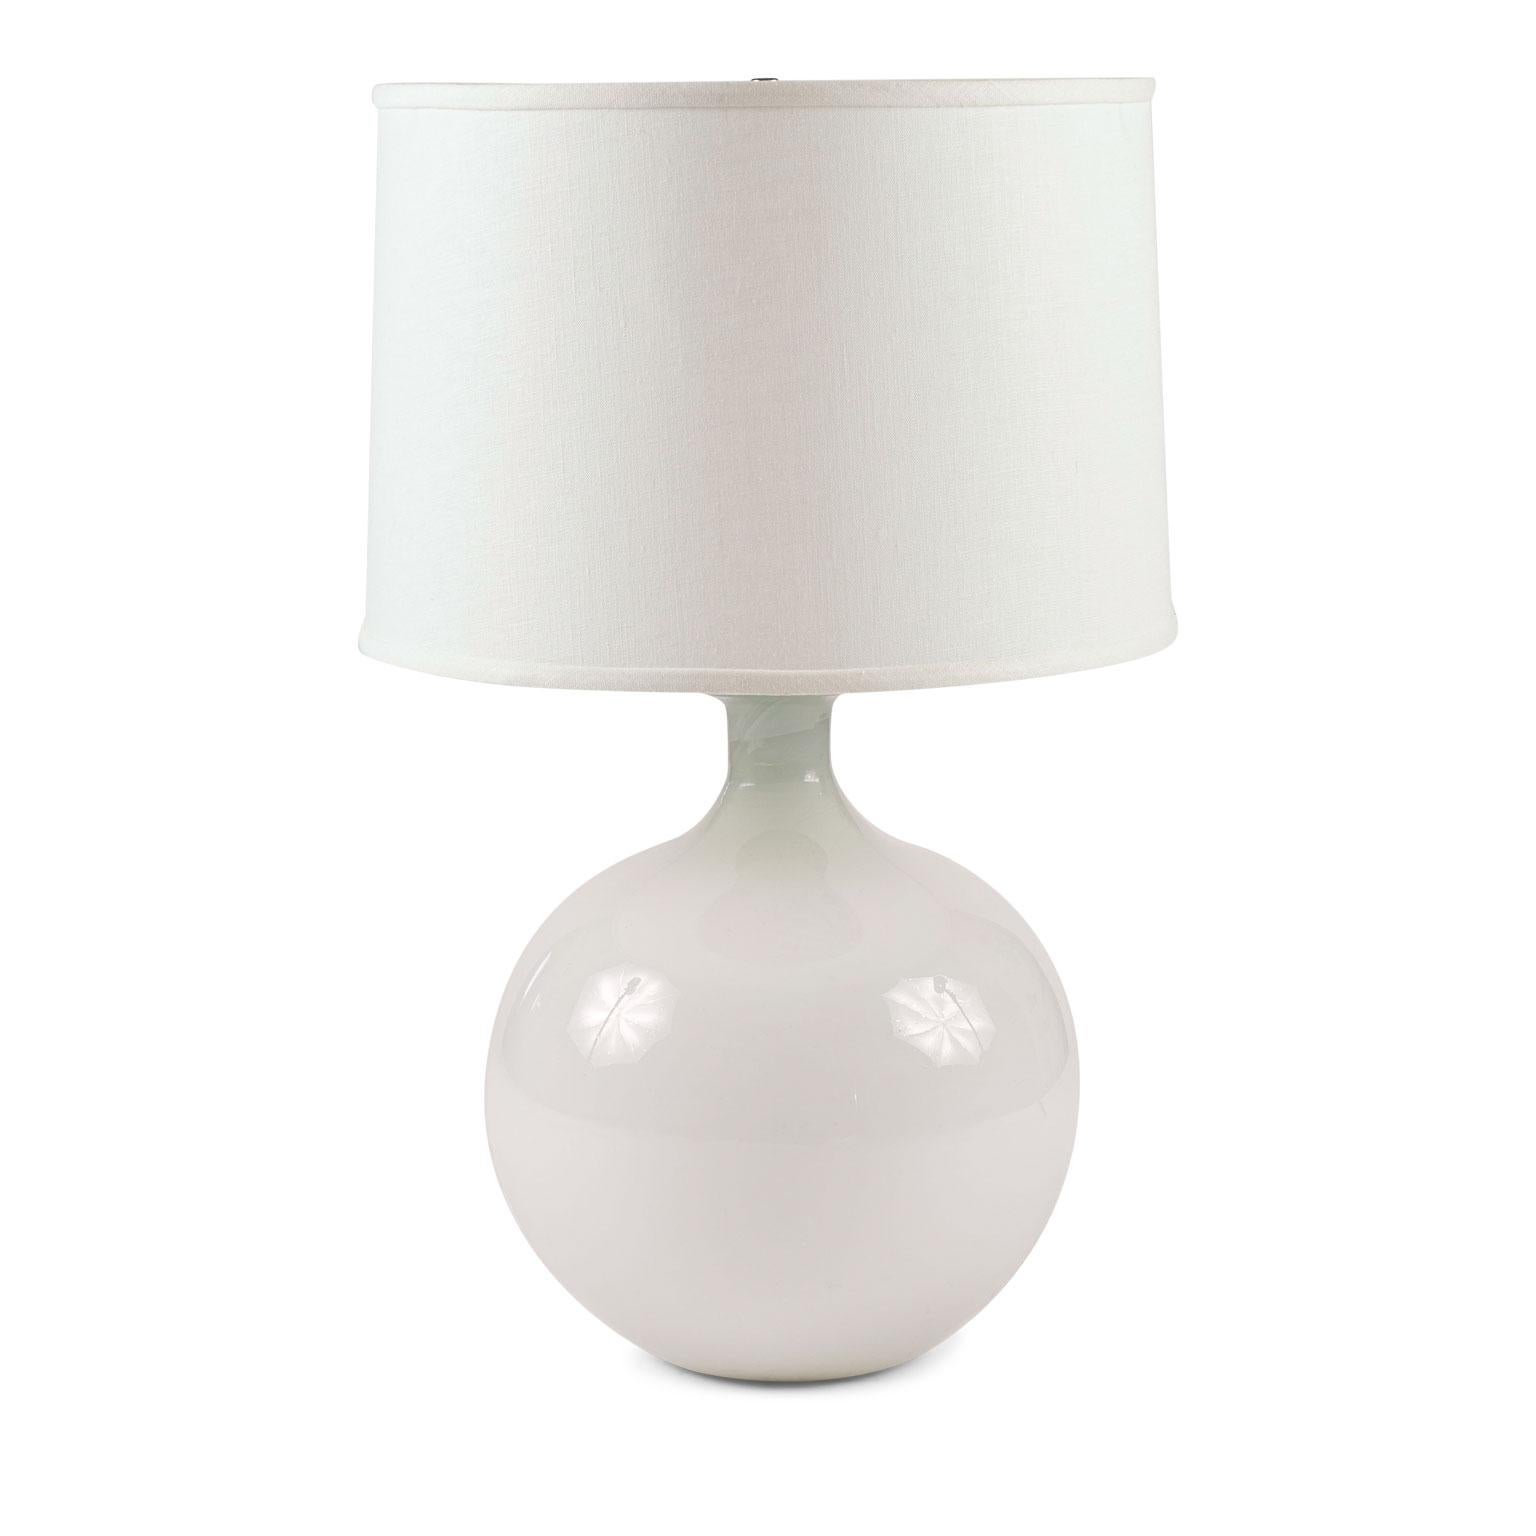 White cased glass spherical shape table lamp (from vase), newly wired for use within the USA using all UL listed parts. Includes complimentary linen shade (listed measurements include shade).